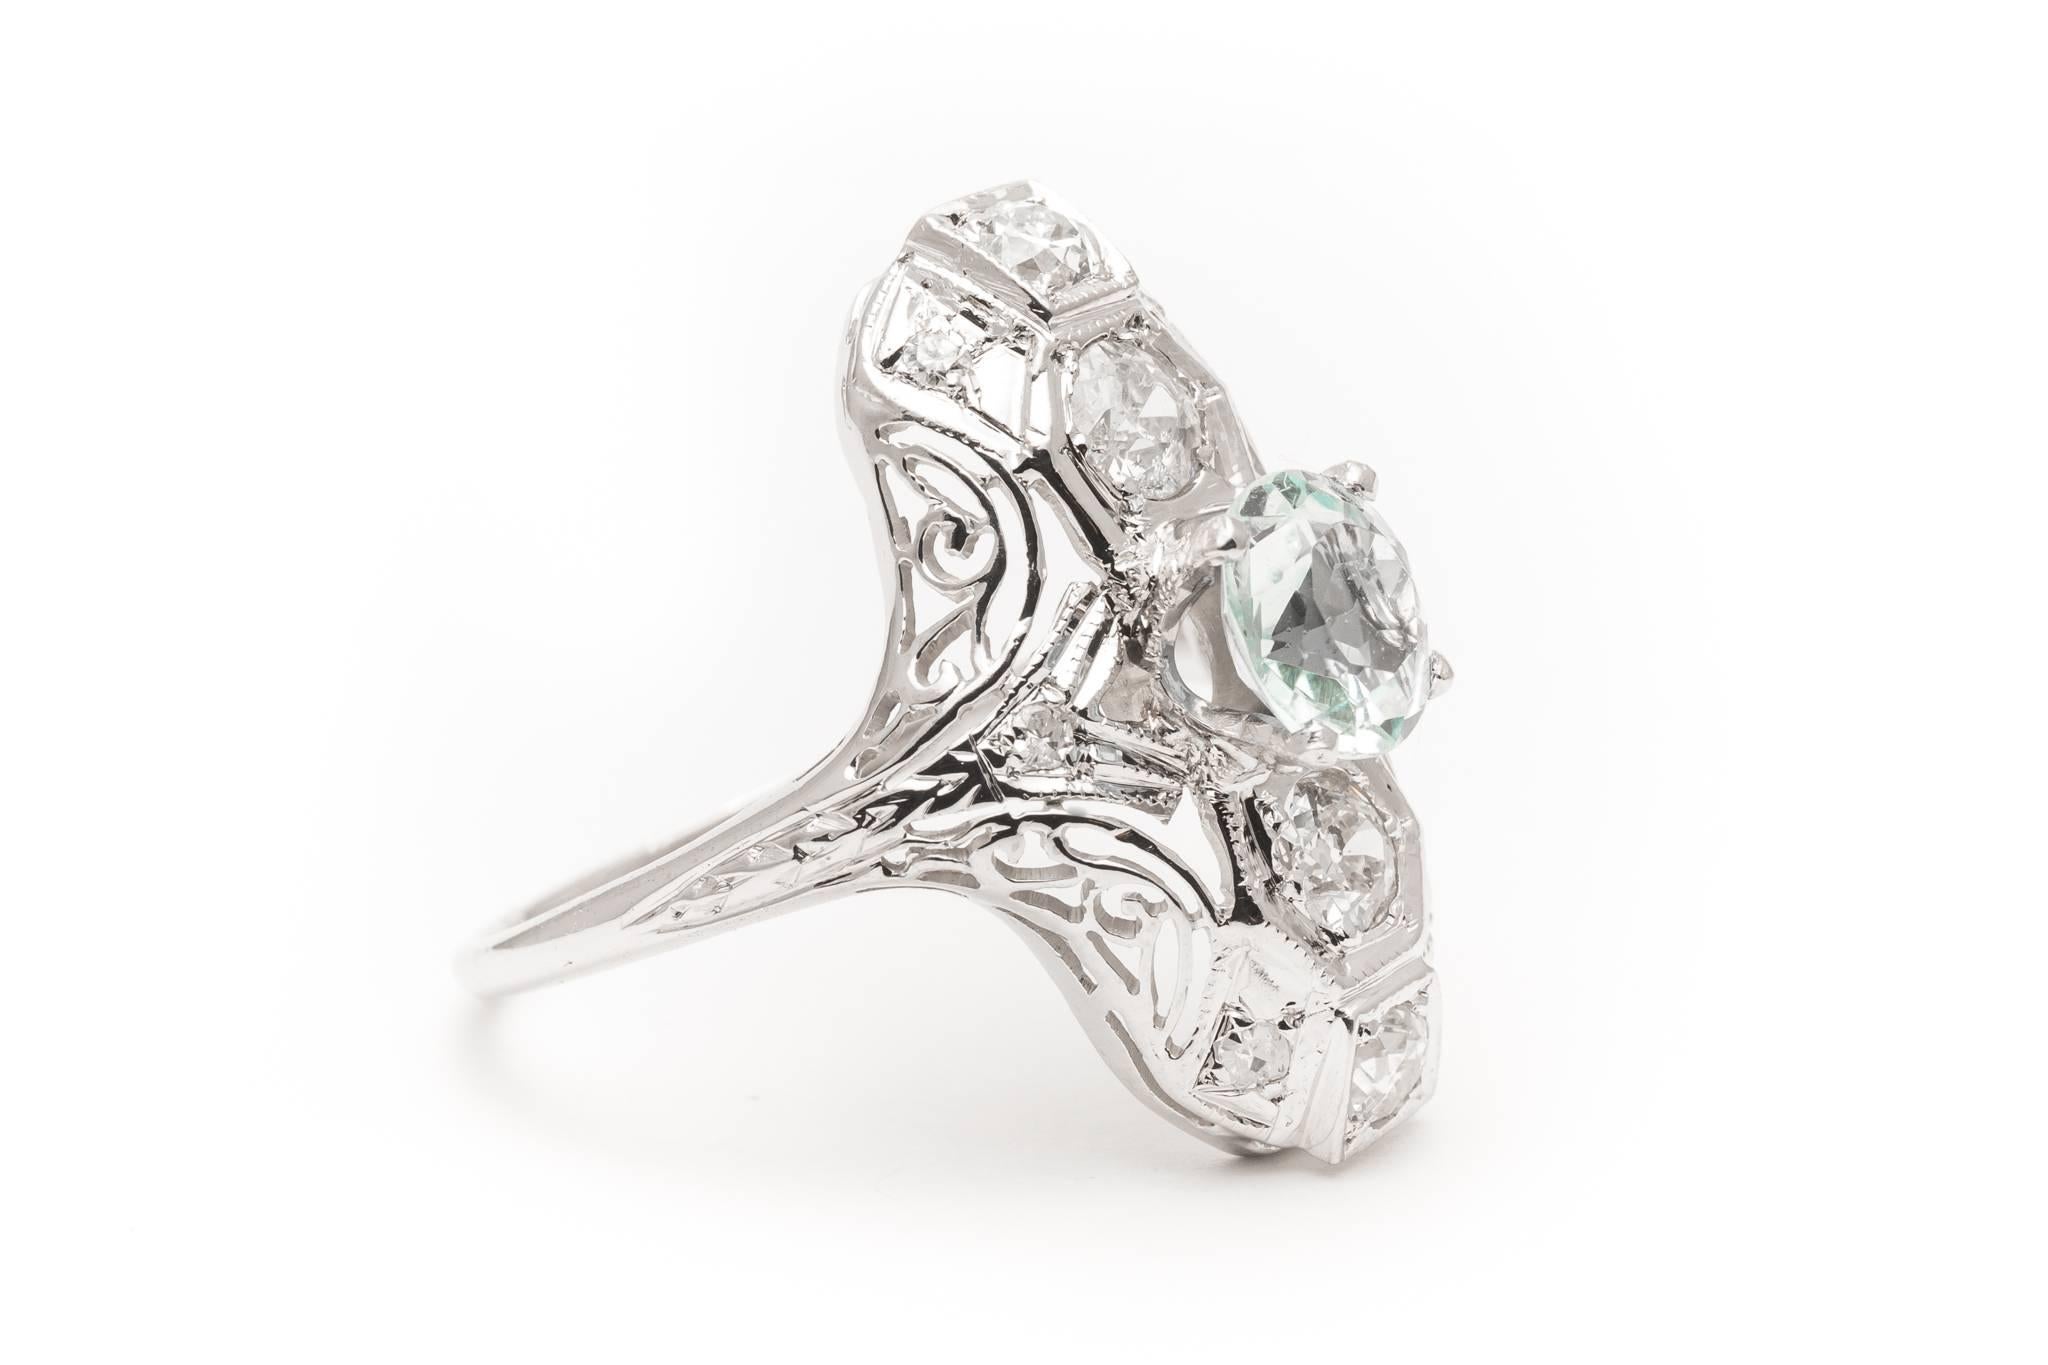 Beacon Hill Jewelers Presents:

A beautiful art deco period diamond and aquamarine ring in 18 karat white gold.  Centered by a high quality 1 carat natural Sky Blue aquamarine, this ring features a total of 0.92 carats of antique European cut